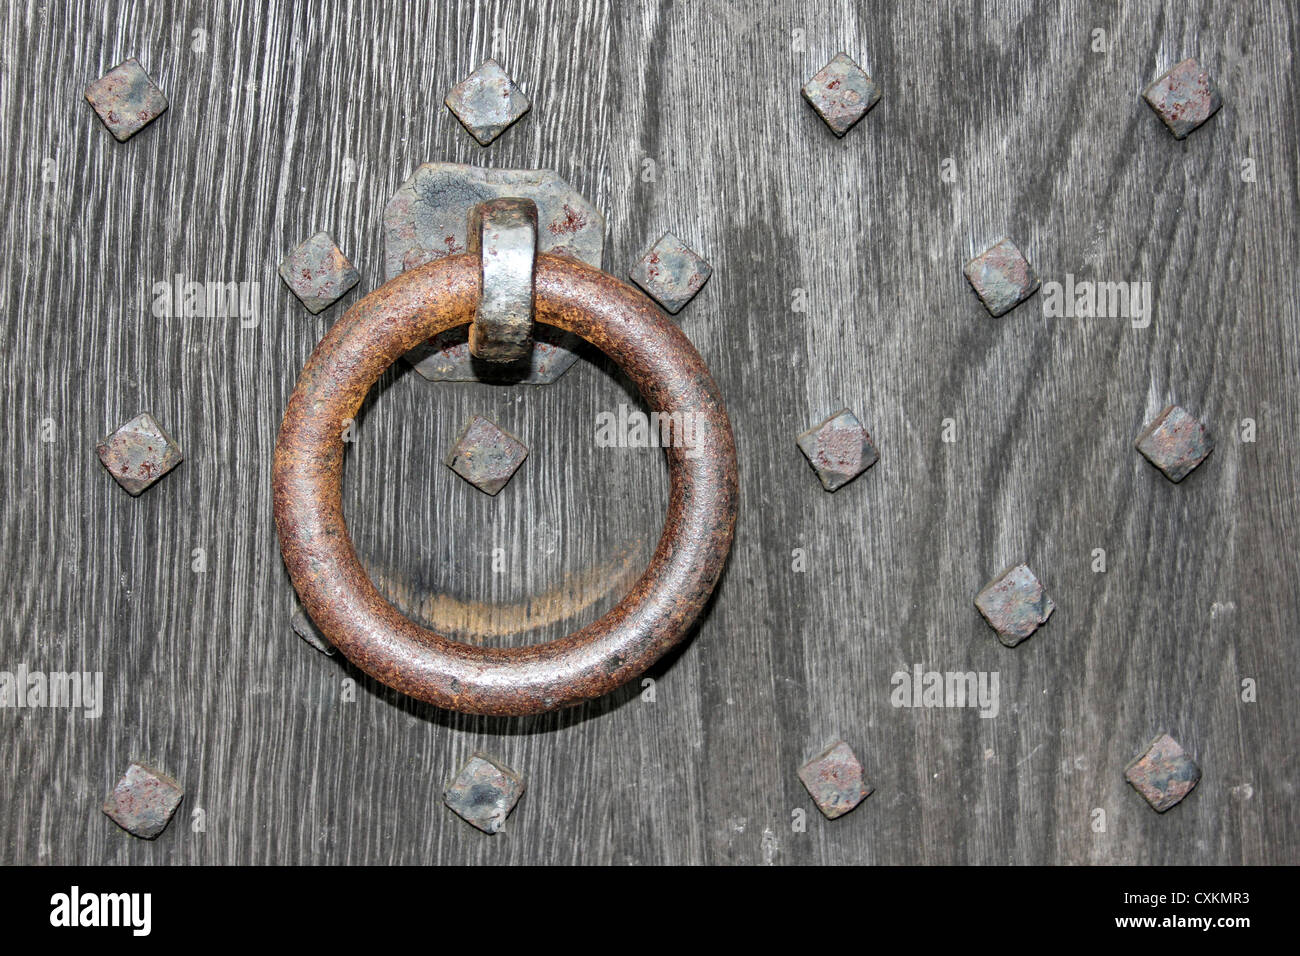 Metal Ring On Wooden Metal Studded Door, The Cage, Lyme Park, Cheshire, UK Stock Photo